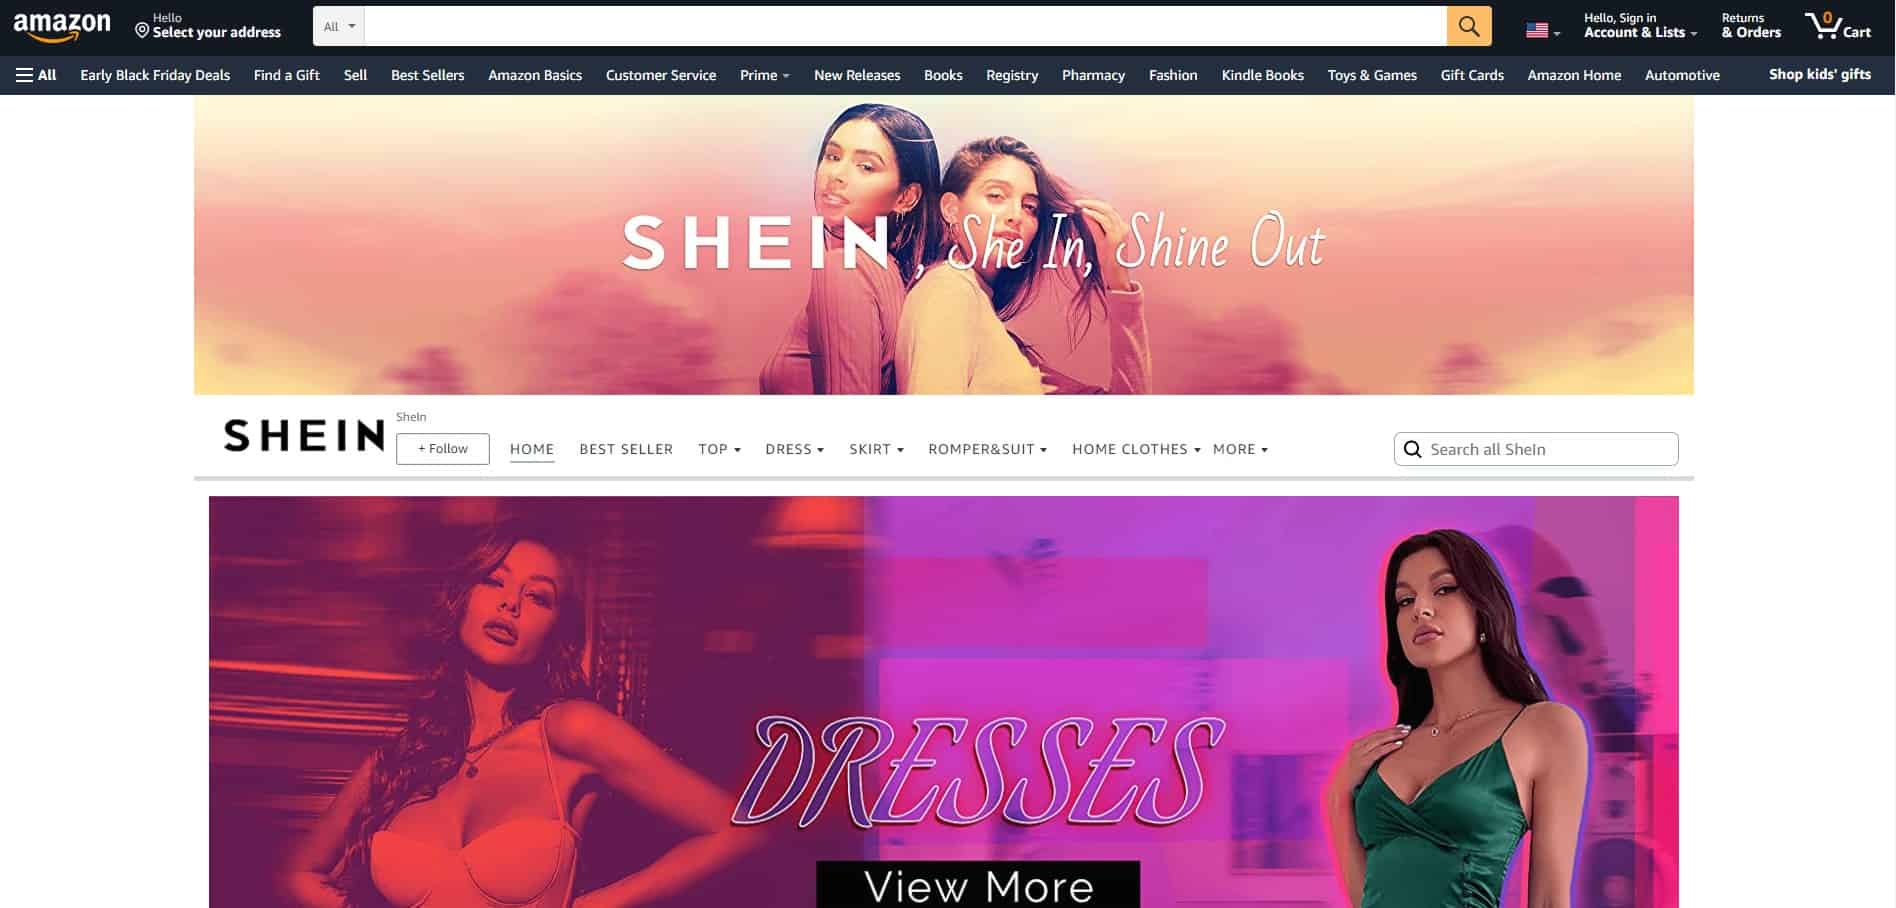 how to get free shein clothes